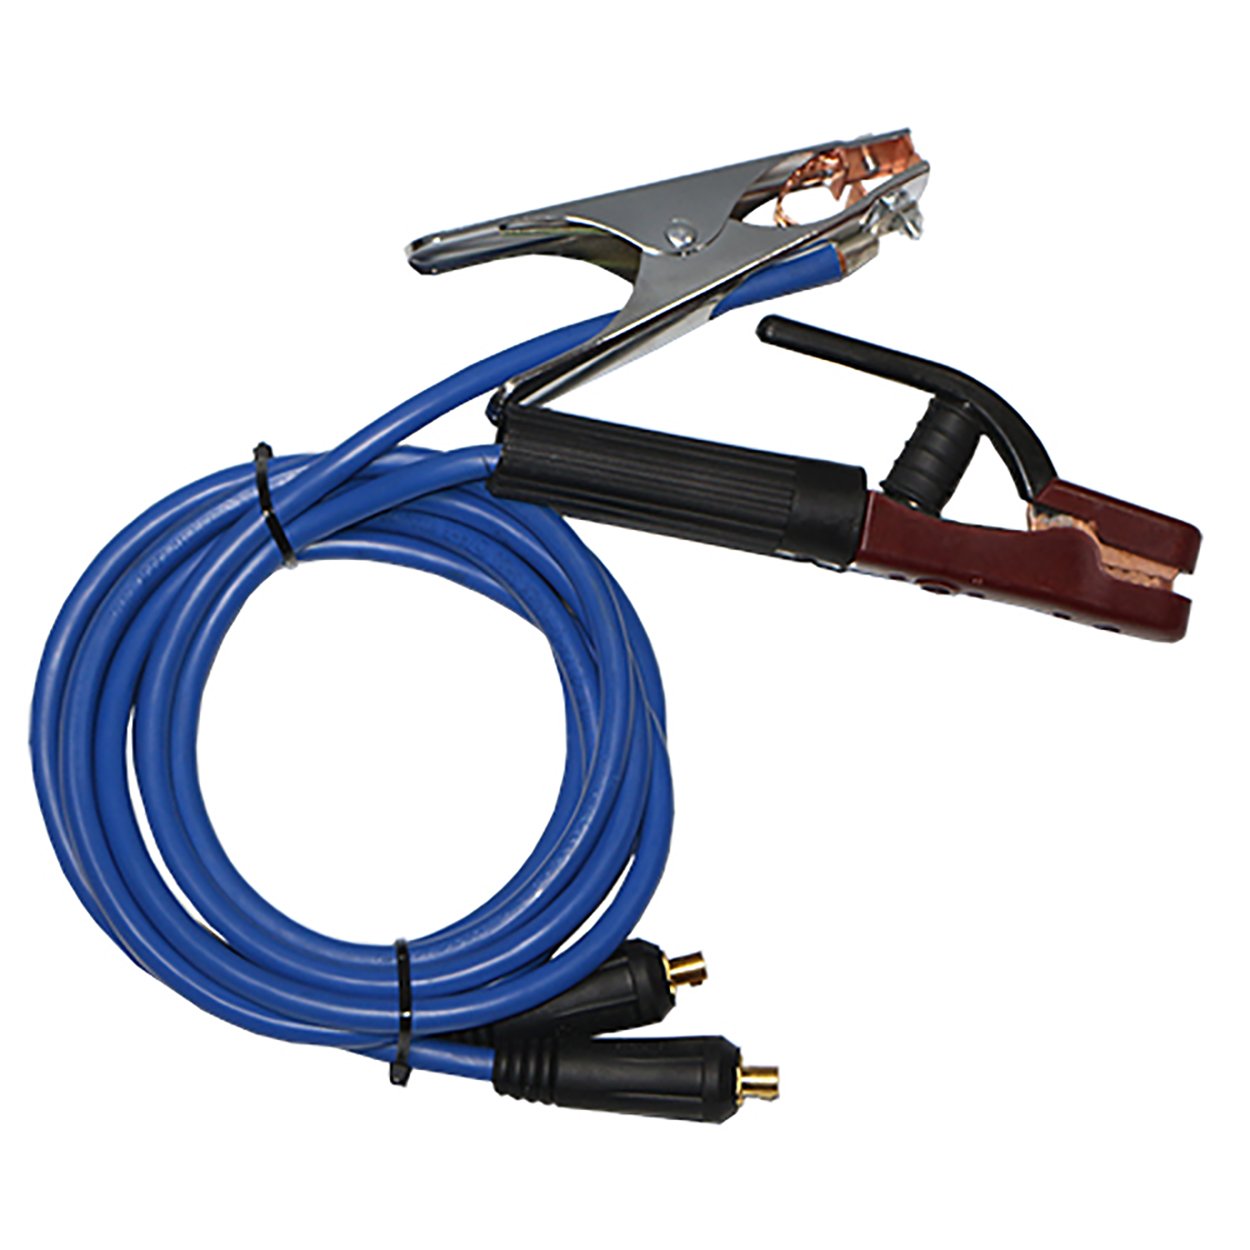 250 Amp Welding Cable Kit